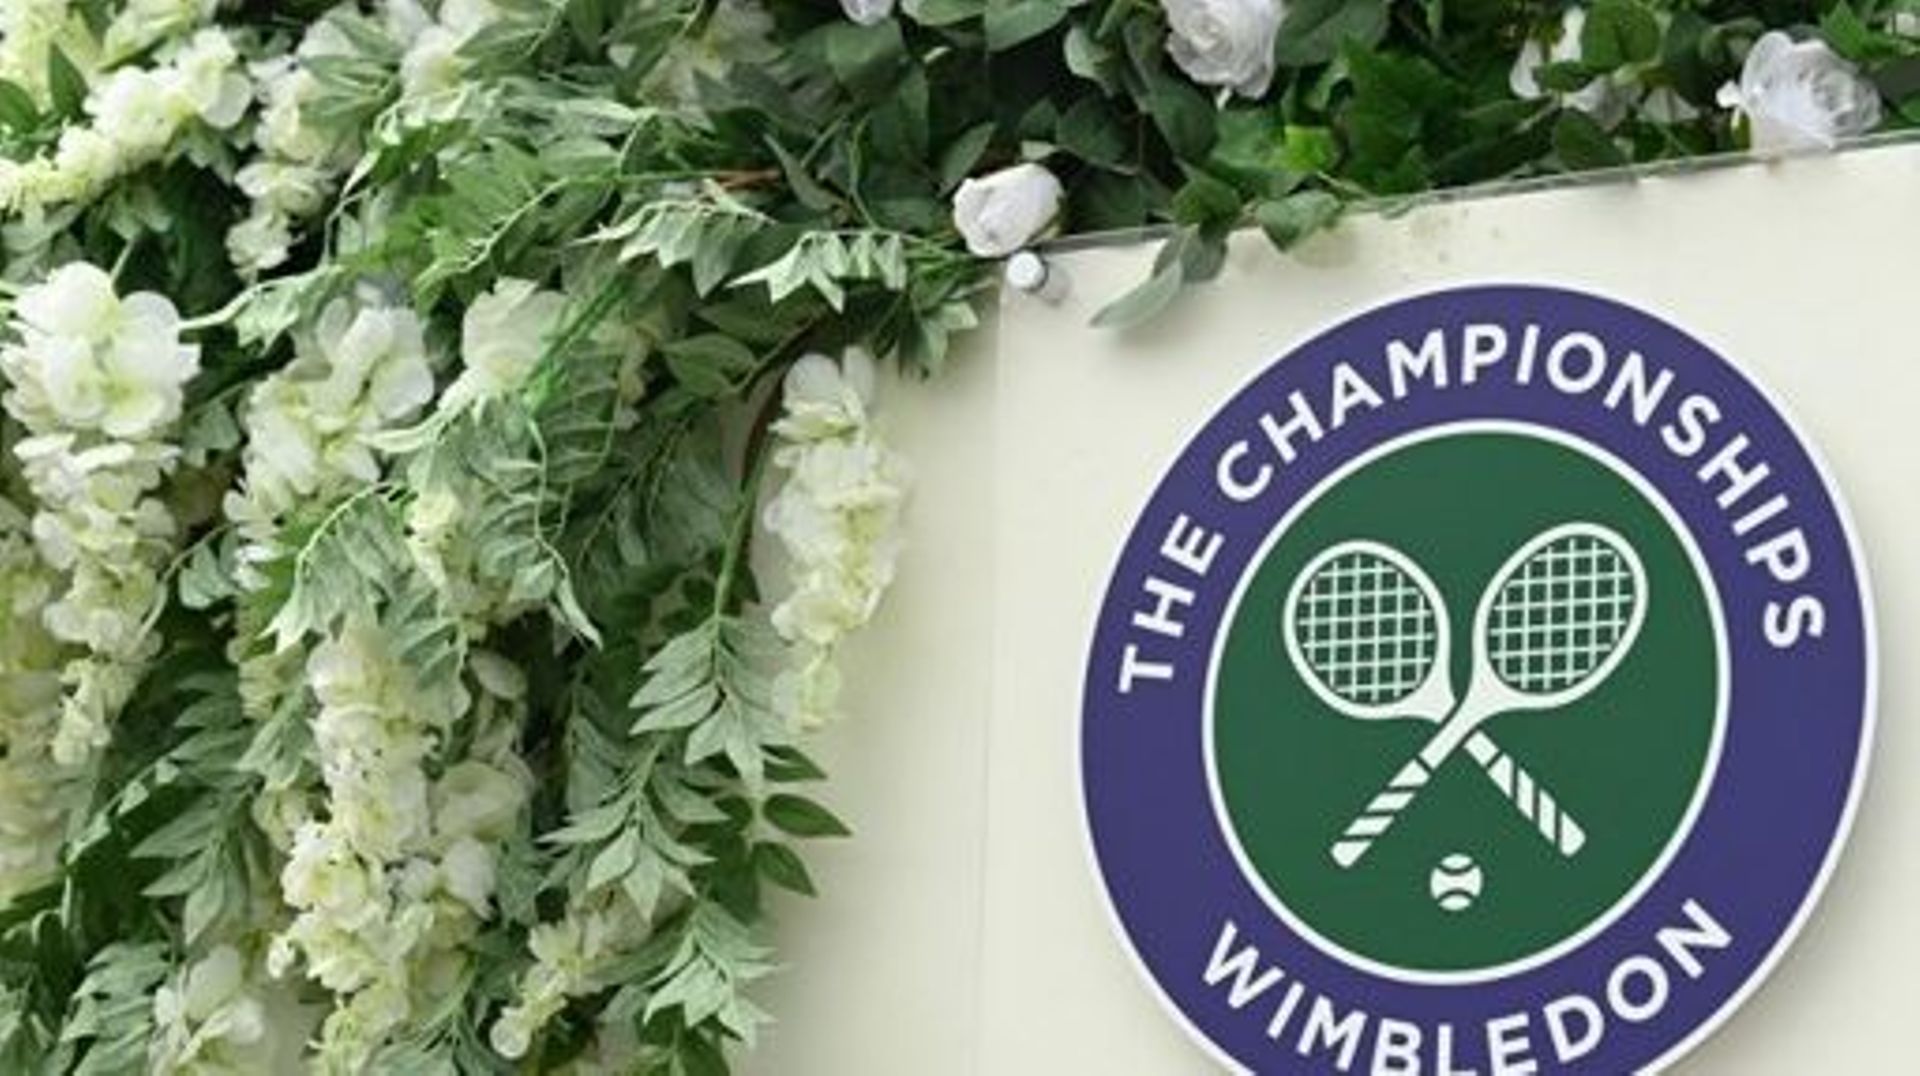 A logo is pictured on the fourth day of the 2021 Wimbledon Championships at The All England Tennis Club in Wimbledon, southwest London, on July 1, 2021.  Glyn KIRK / AFP